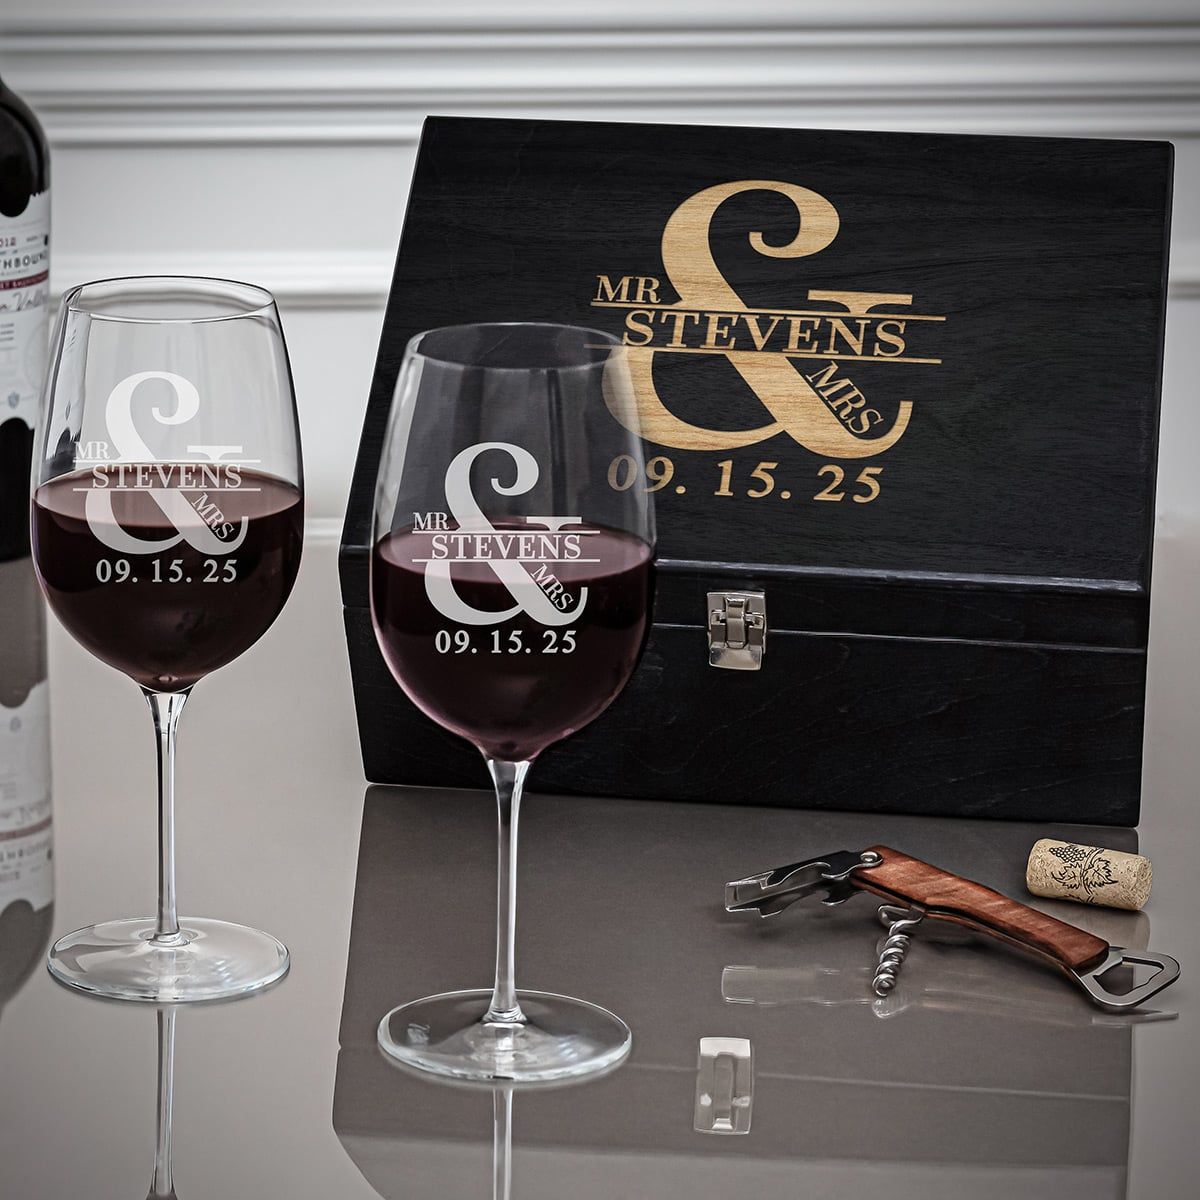 https://images.homewetbar.com/media/catalog/product/e/n/engraved-wine-gift-box-set-love-and-marriage-p-9656.jpg?store=default&image-type=image